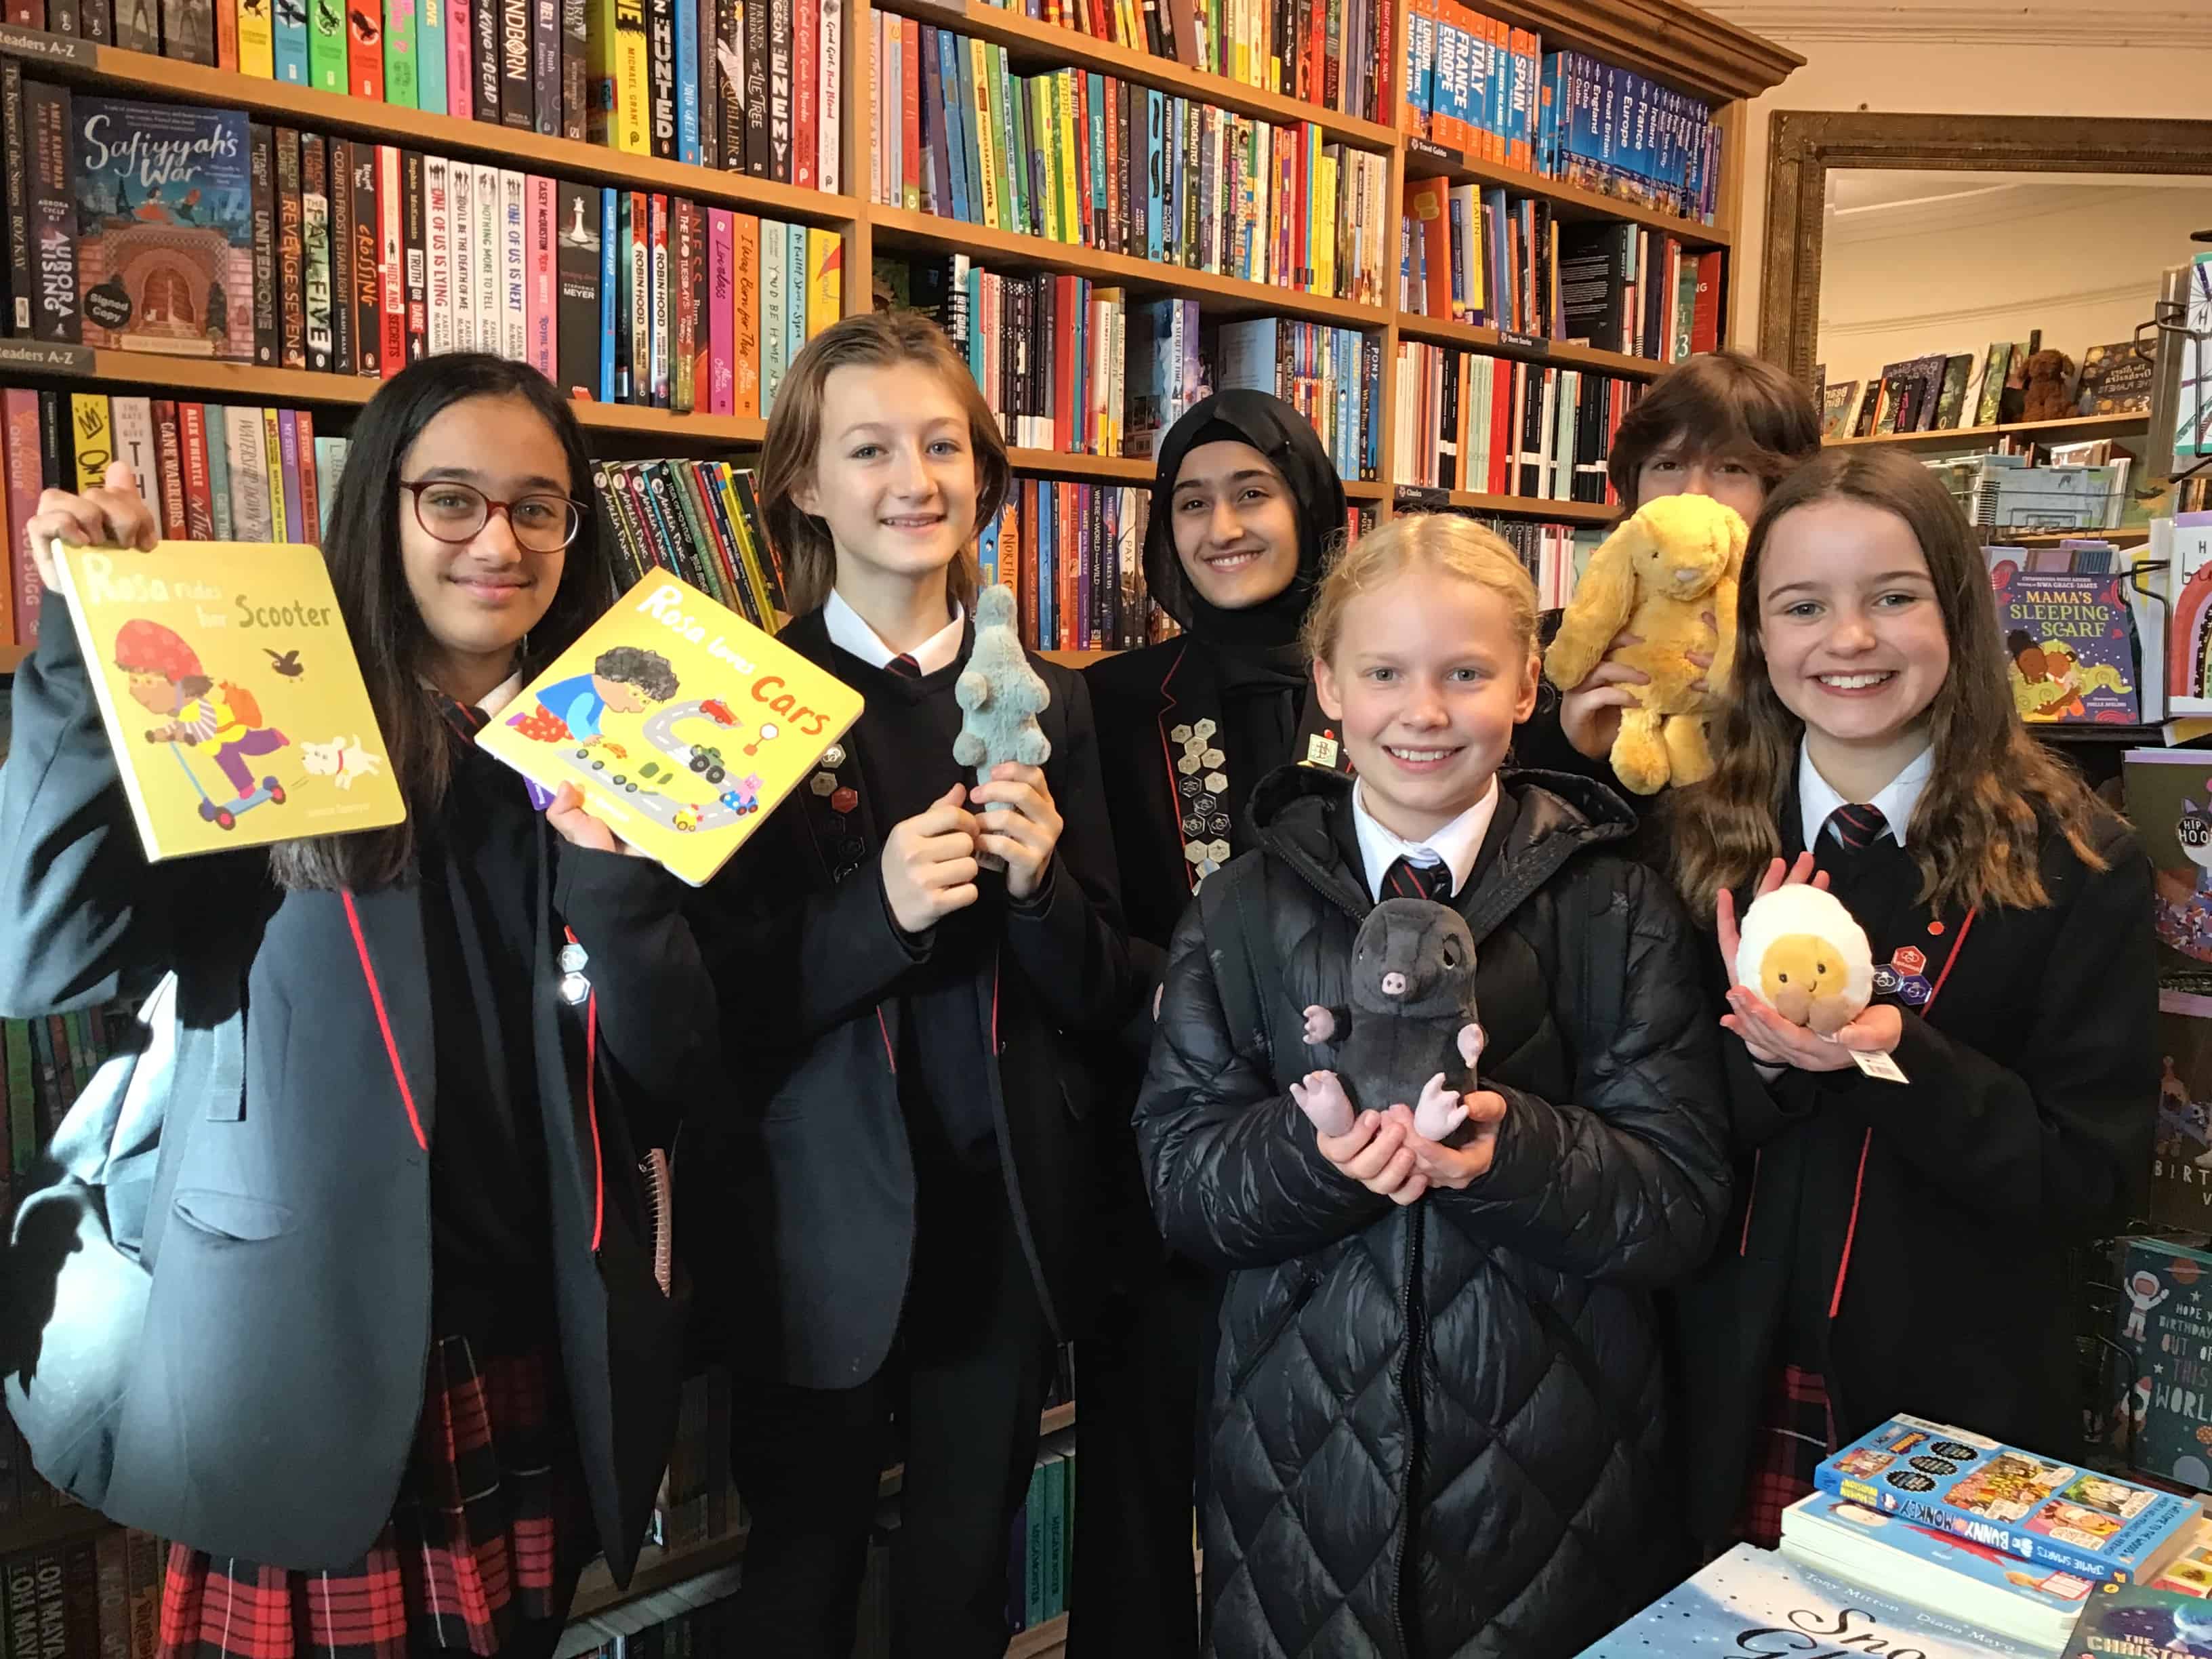 A group of student librarians from Didsbury High School hold books at Chorlton Bookshop.